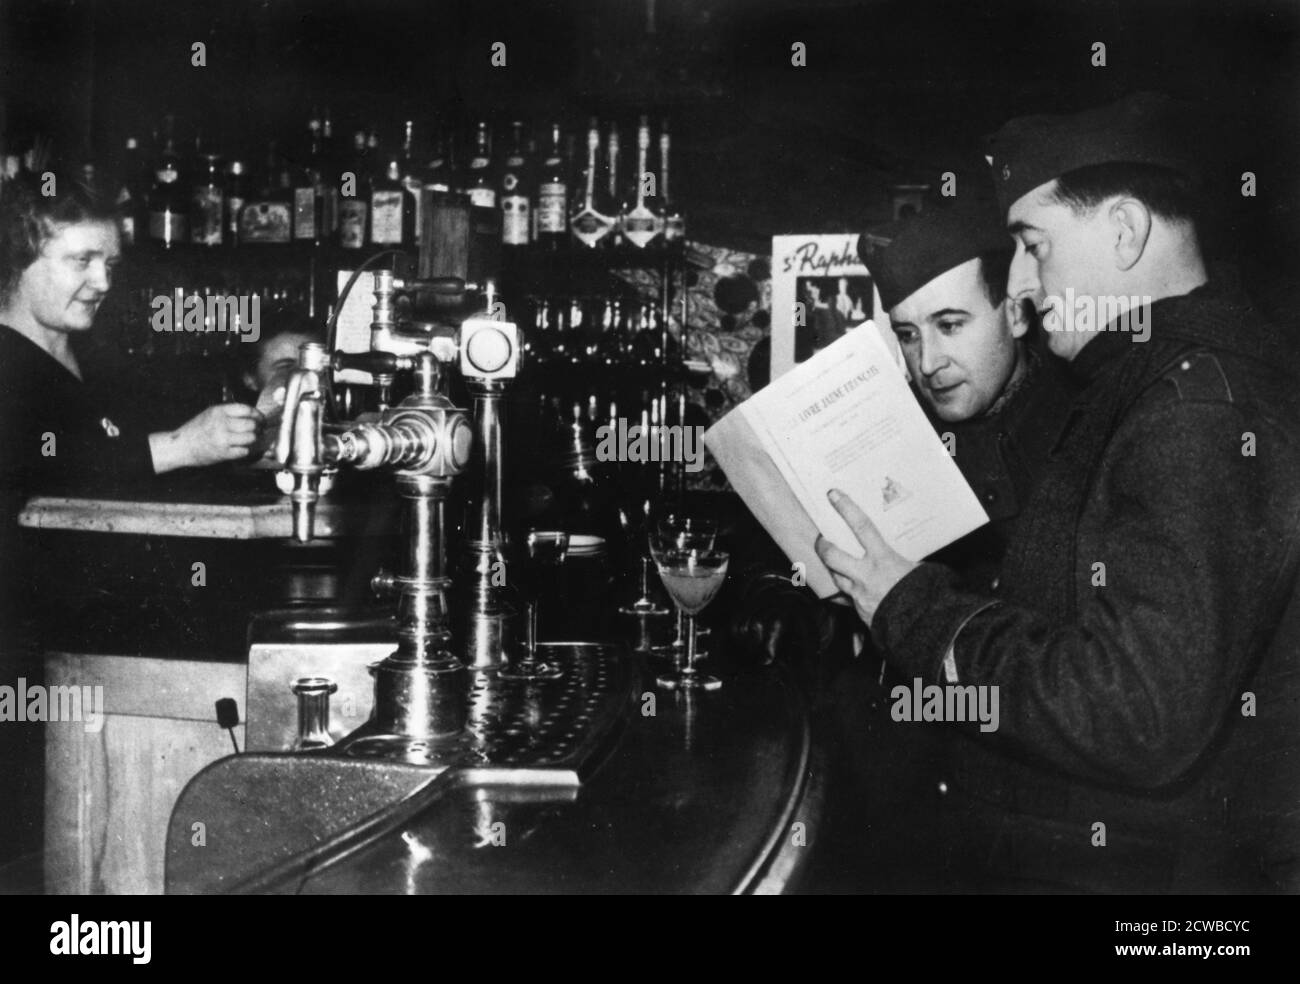 Two French soldiers on leave in a cafe, c1939-1940. They are looking at a copy of Le Livre Jaune Francais, a book published by the French Foreign Ministry relating to diplomatic negotiations between Britain, France, Poland and Germany before the outbreak of World War II. The photographer is unknown. Stock Photo